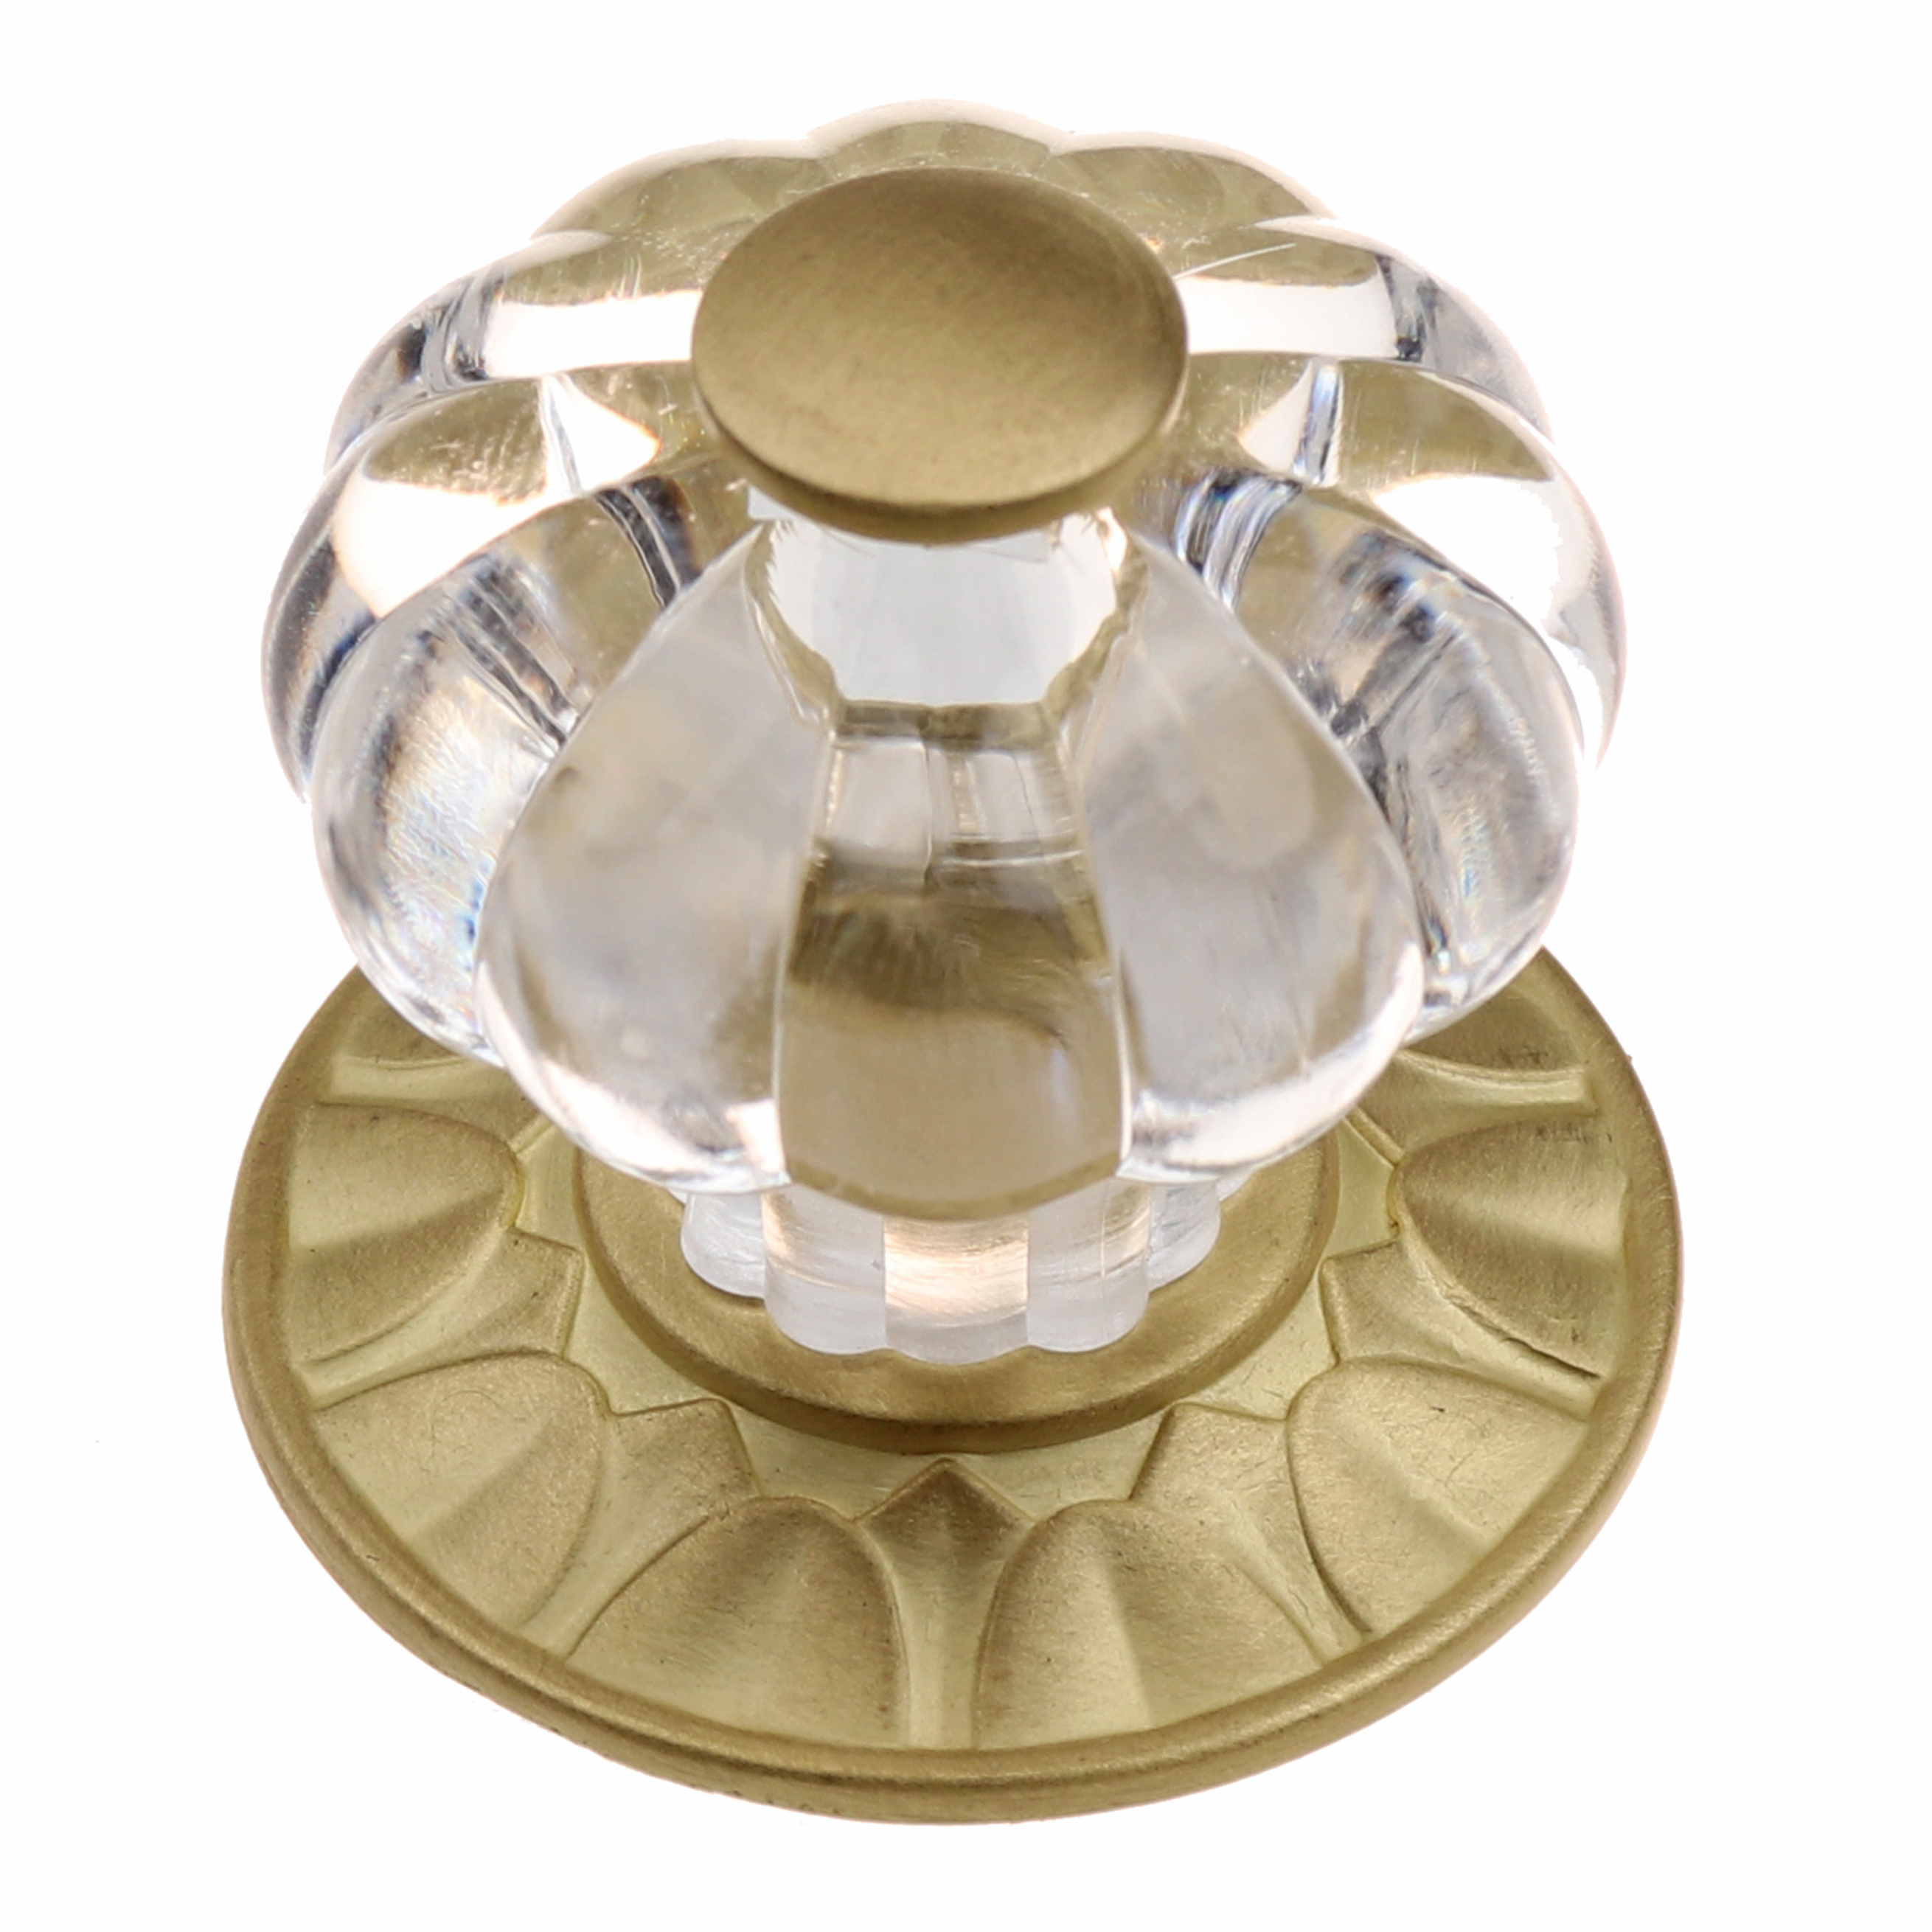 1-1/4-inch Clear Acrylic Melon Cabinet Knob with Satin Gold Backplate - 235140-SG ( Pack of 10) - image 1 of 3